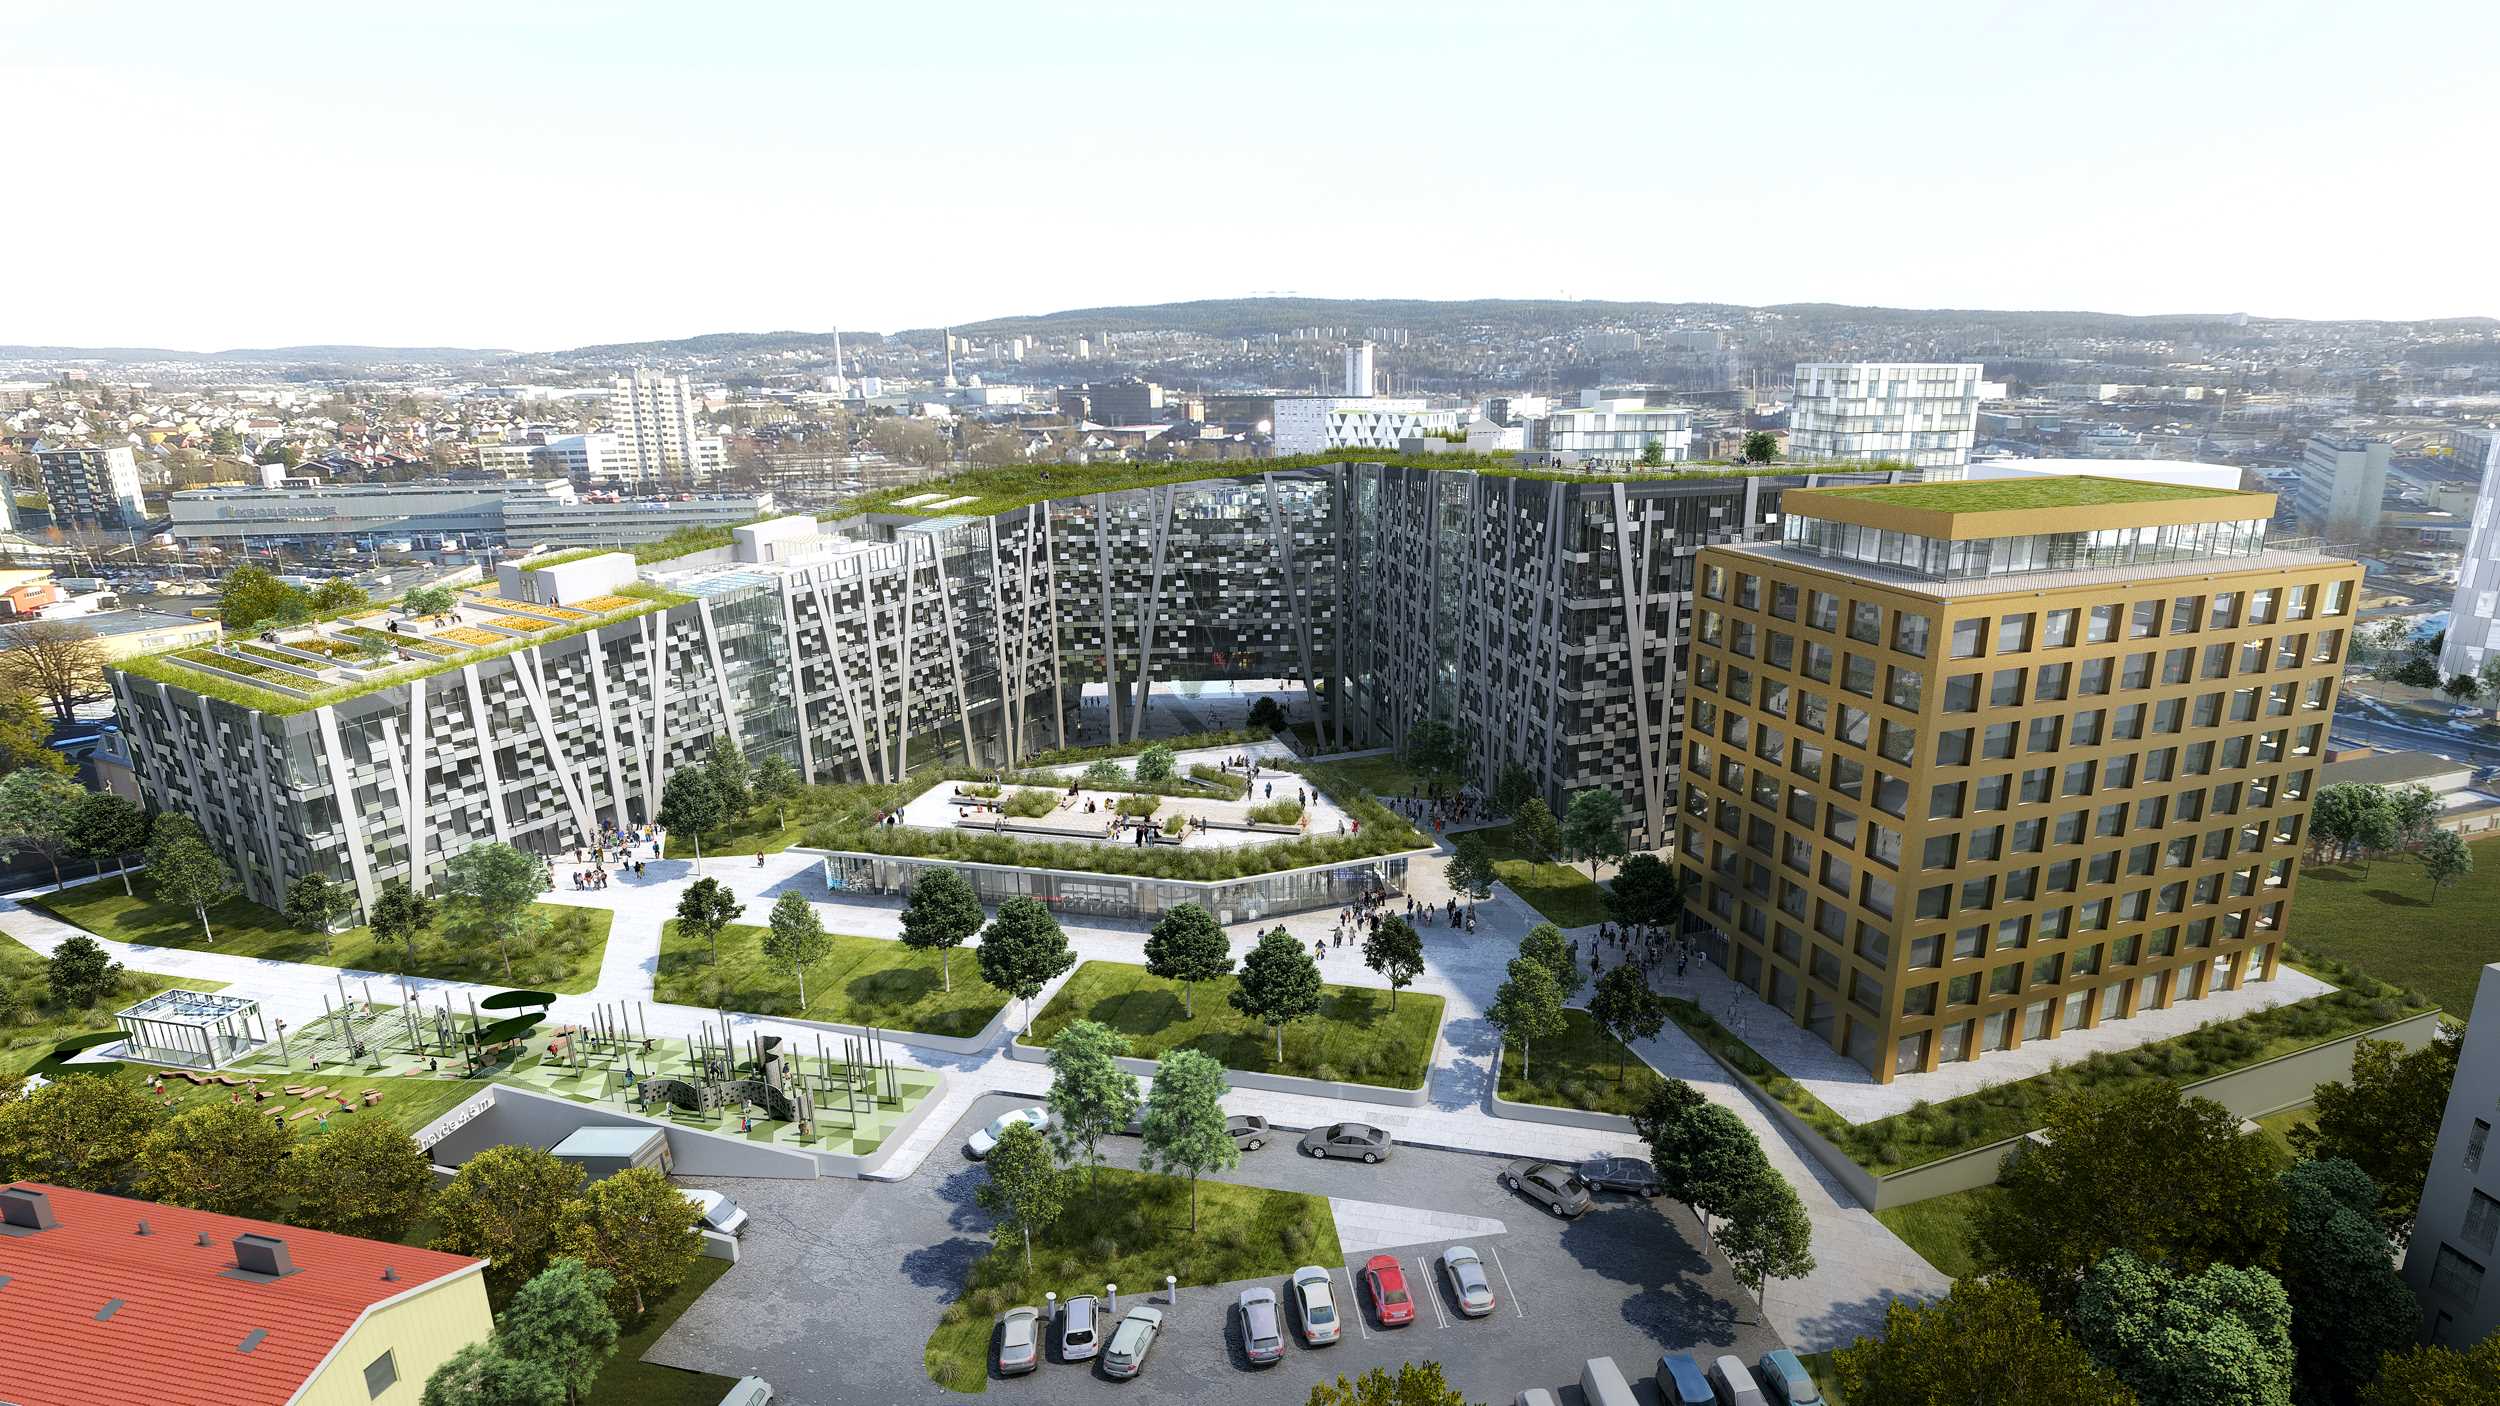 One of the largest development projects in Norway, the Økern Portal, is using a WICONA curtain wall solution made of Hydro’s CIRCAL 75R aluminium.(2)